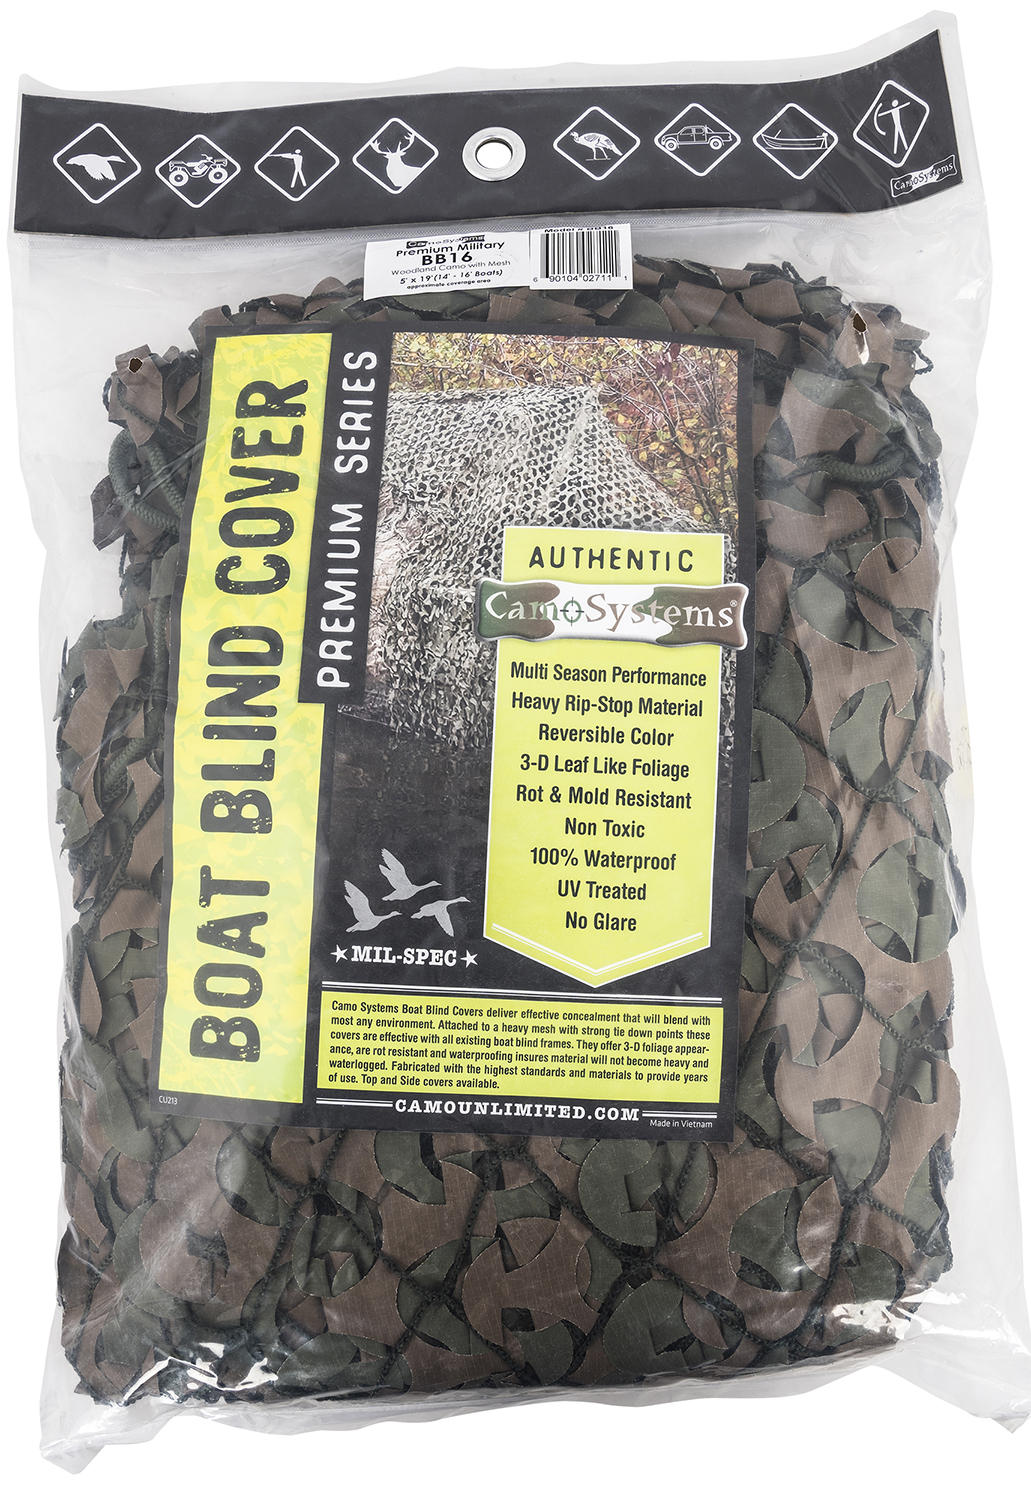 Camo Systems BB16 Military Boat Concealment Green/Brown 5 x 19 Ripstop Mesh Attachment